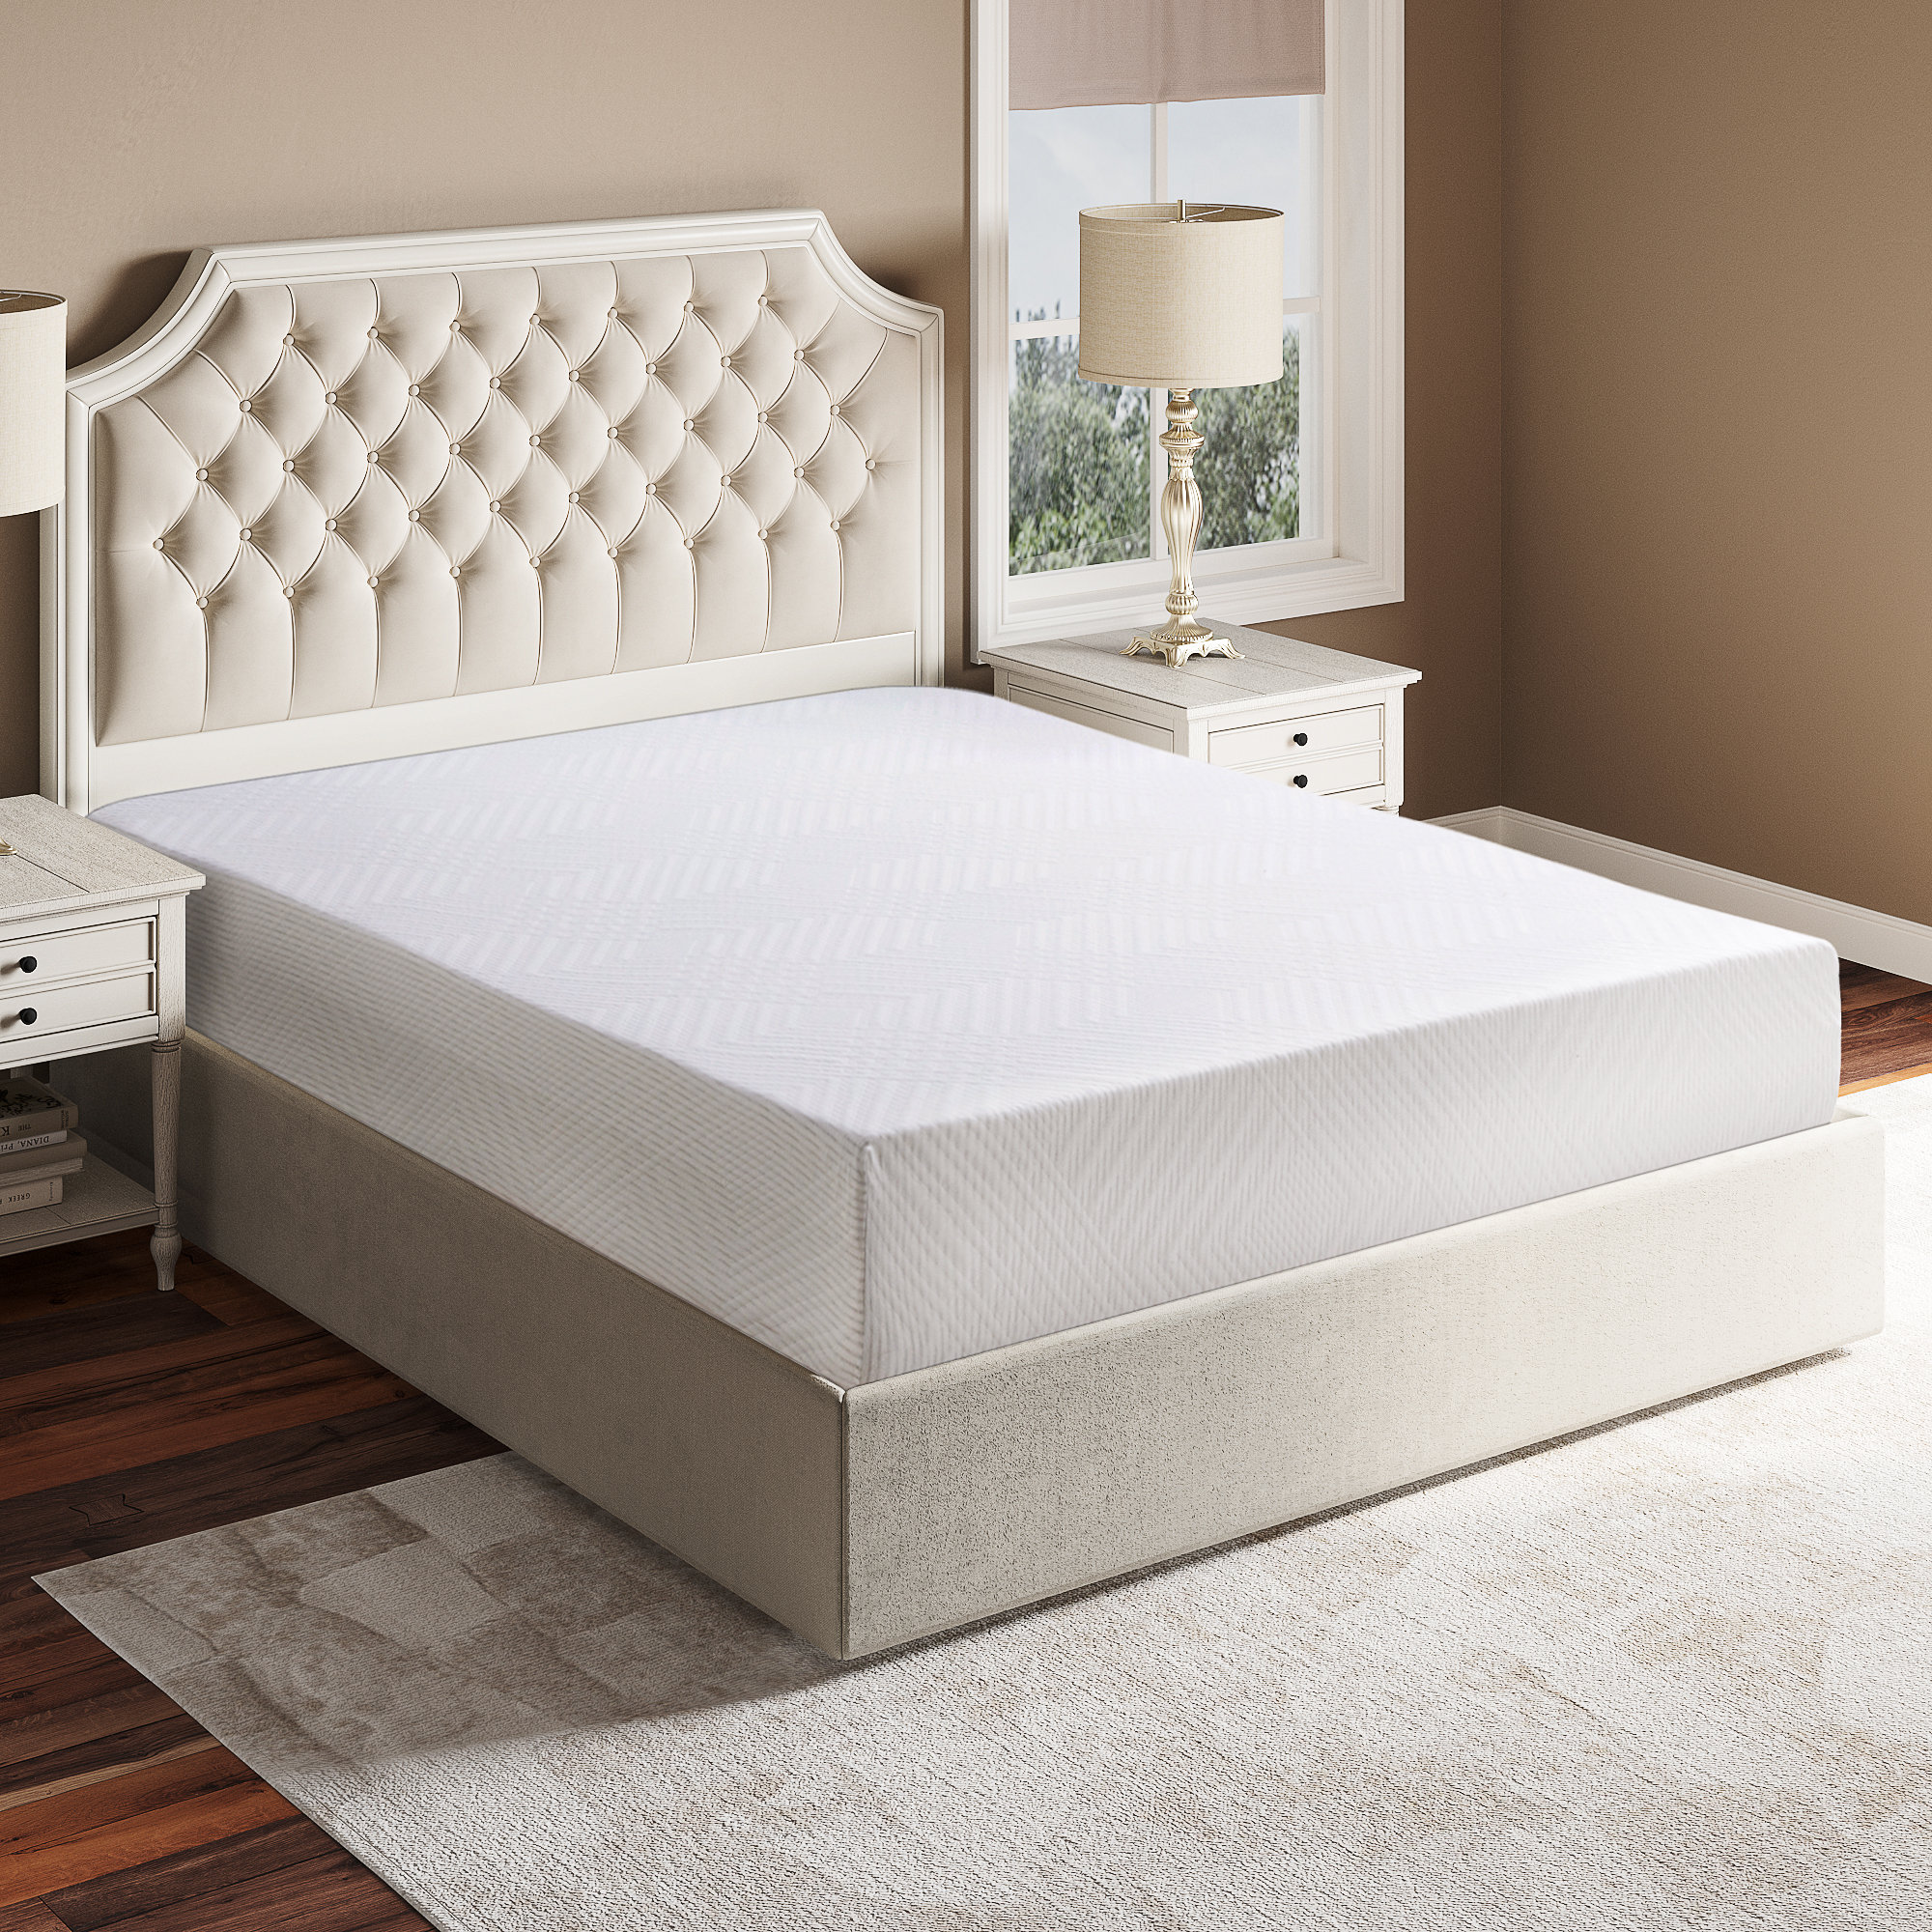 Angeles Home 10 in. Twin Bed Mattress Memory Foam Twin Size with Jacquard Cover for Adjustable Bed Base